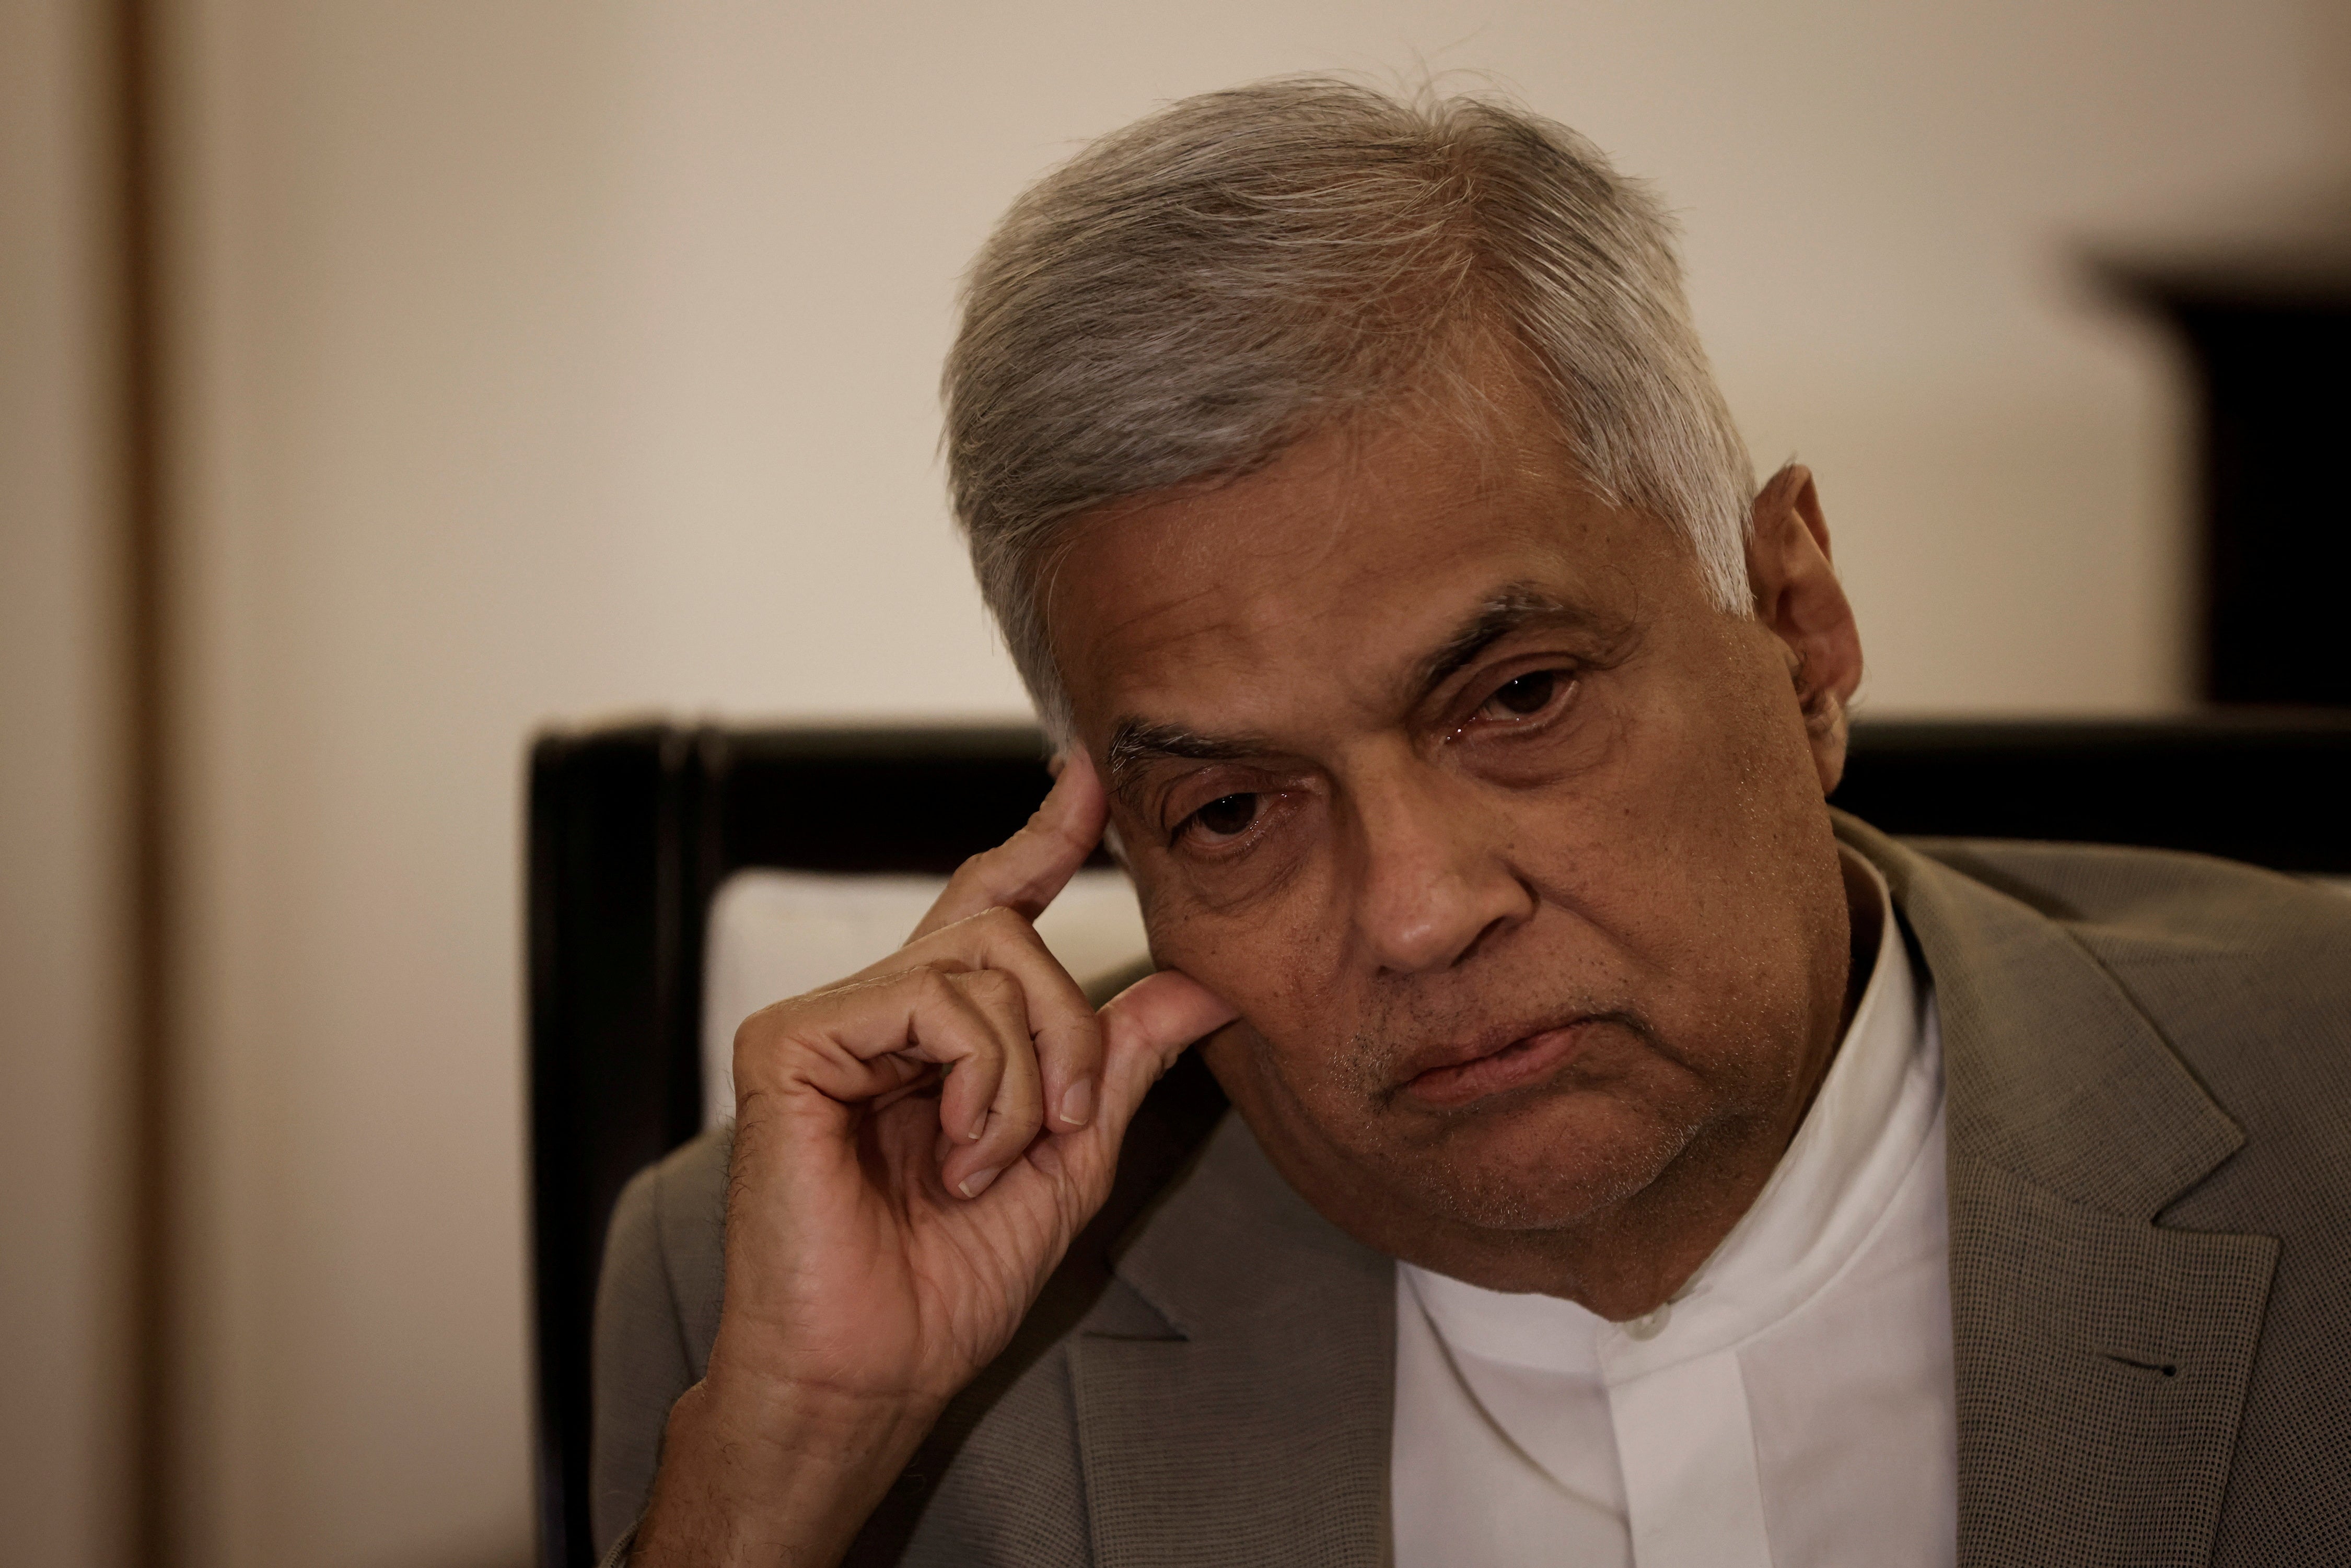 Ranil Wickremesinghe was also made the finance minister in May after one of Rajapaksa’s brothers resigned from the post